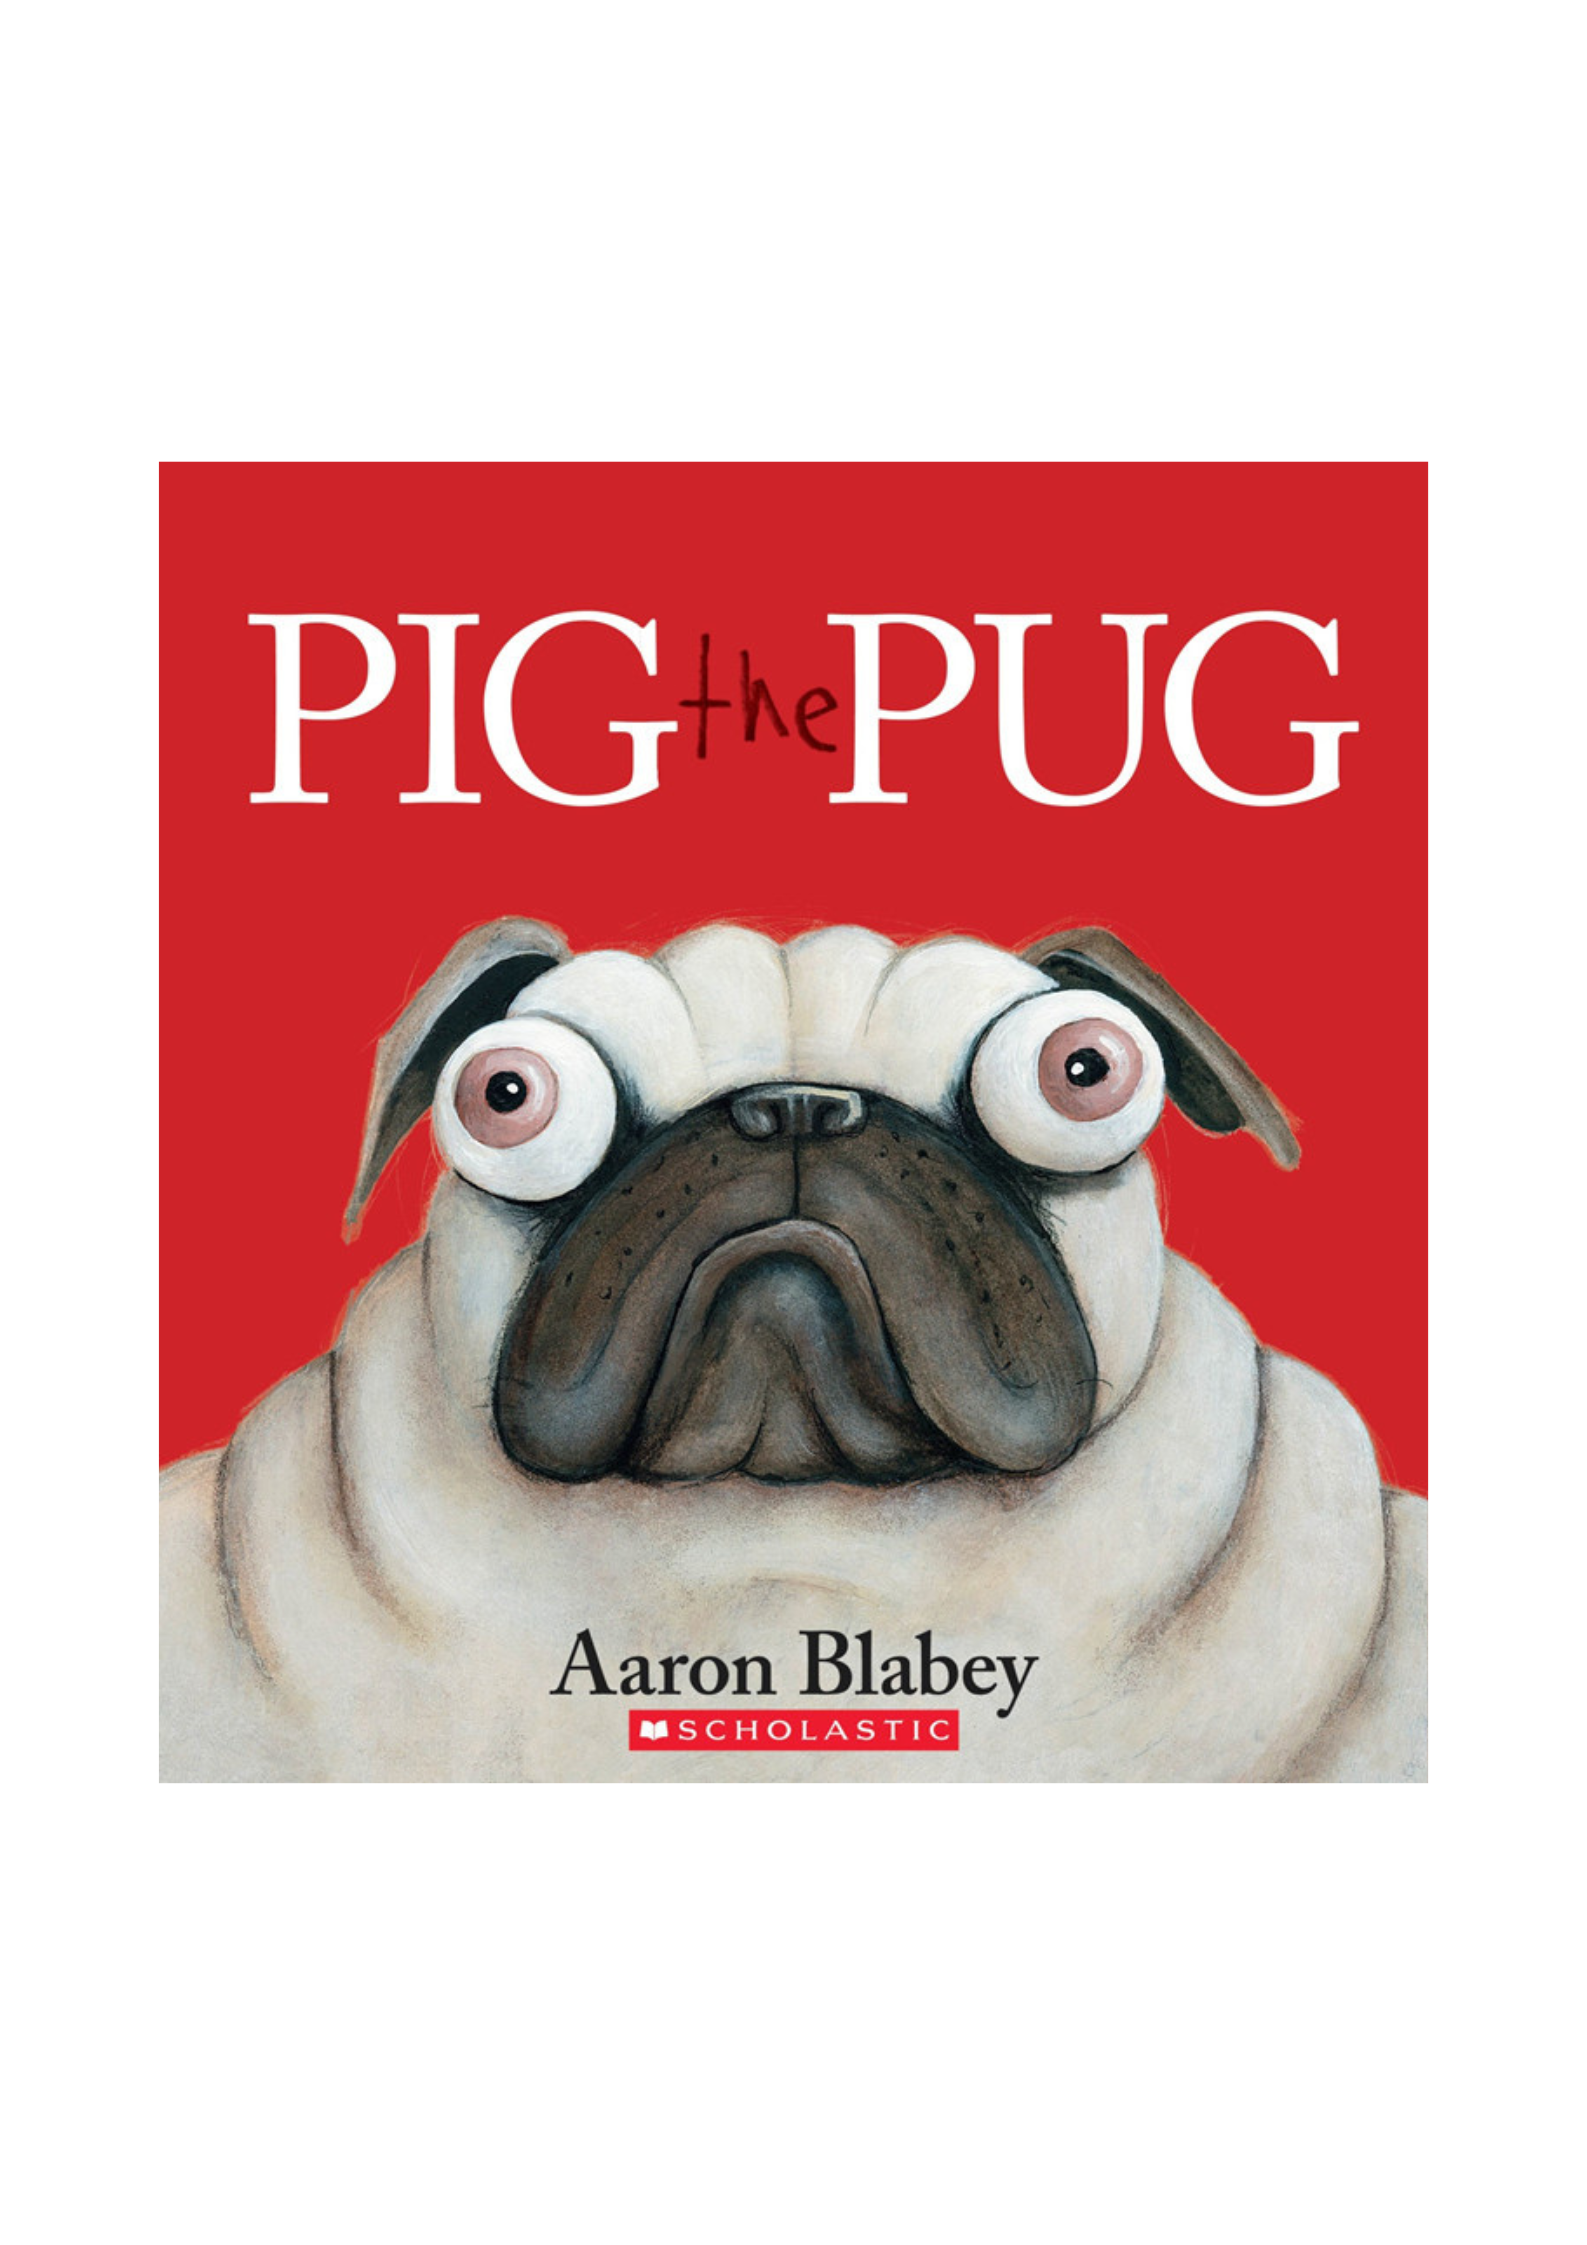 Pig the Pug (Scholastic Picture Book Garden 2)